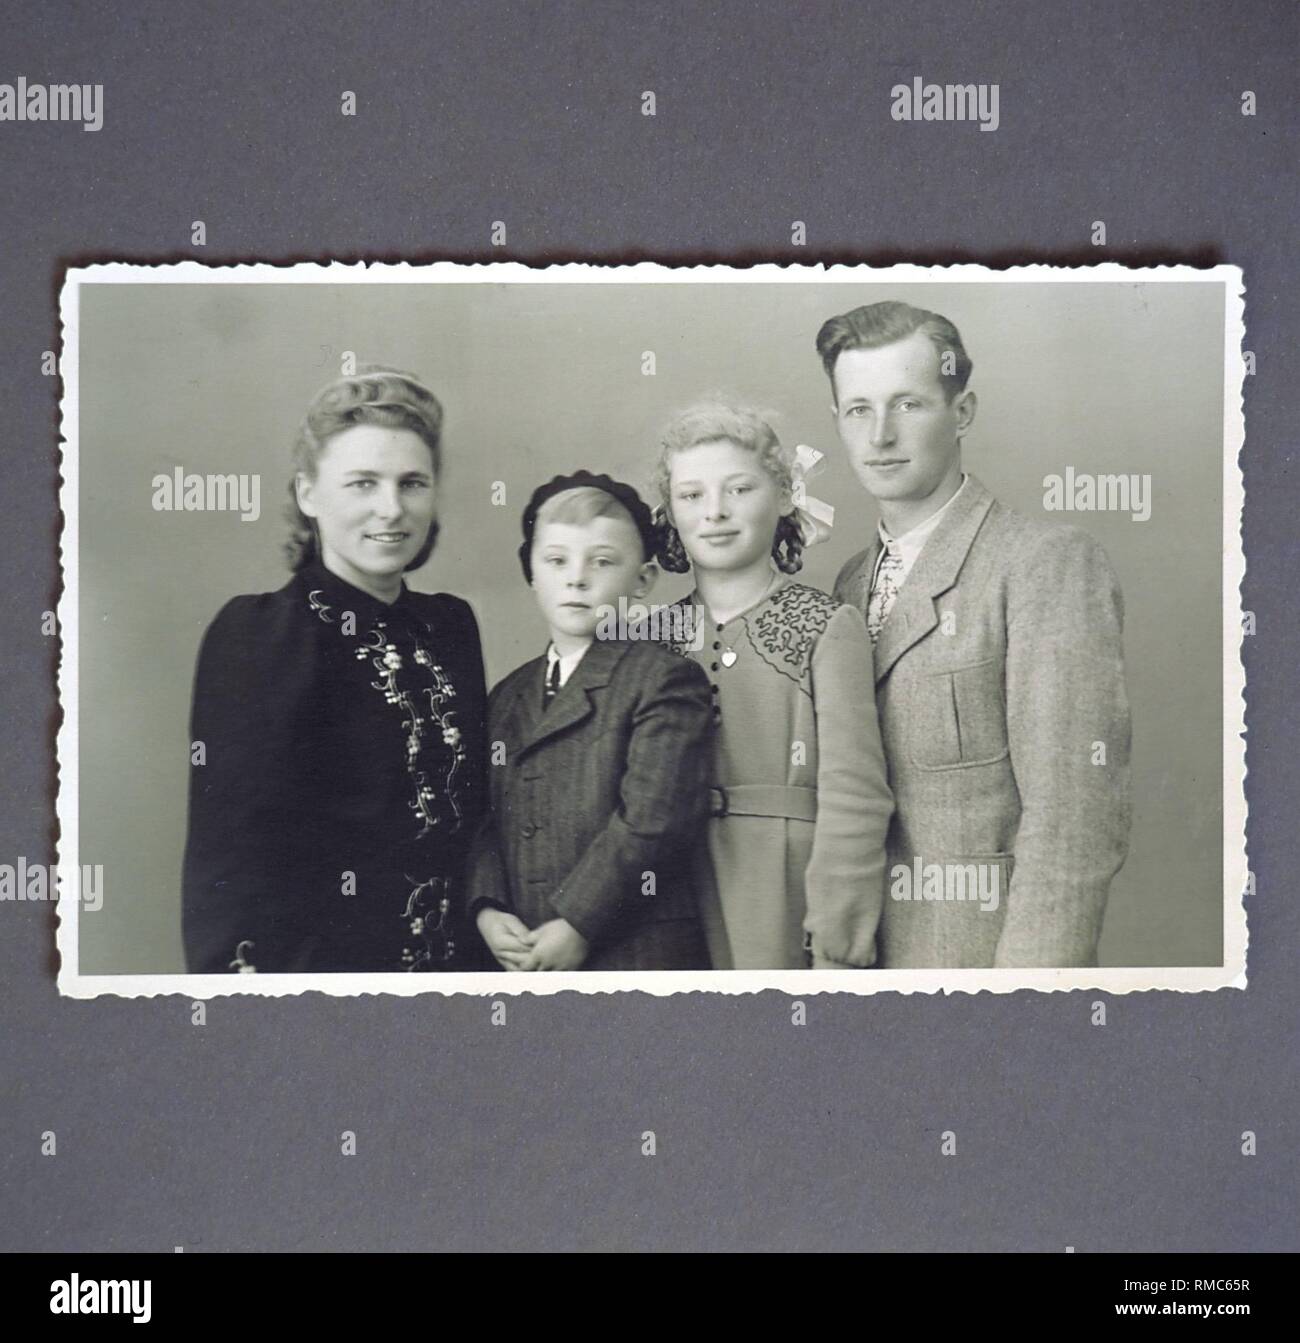 Historical family photo: On the picture Richard and Anneliese Link with their two children Richard jun. and Marianne in Trossingen, 1950. Stock Photo